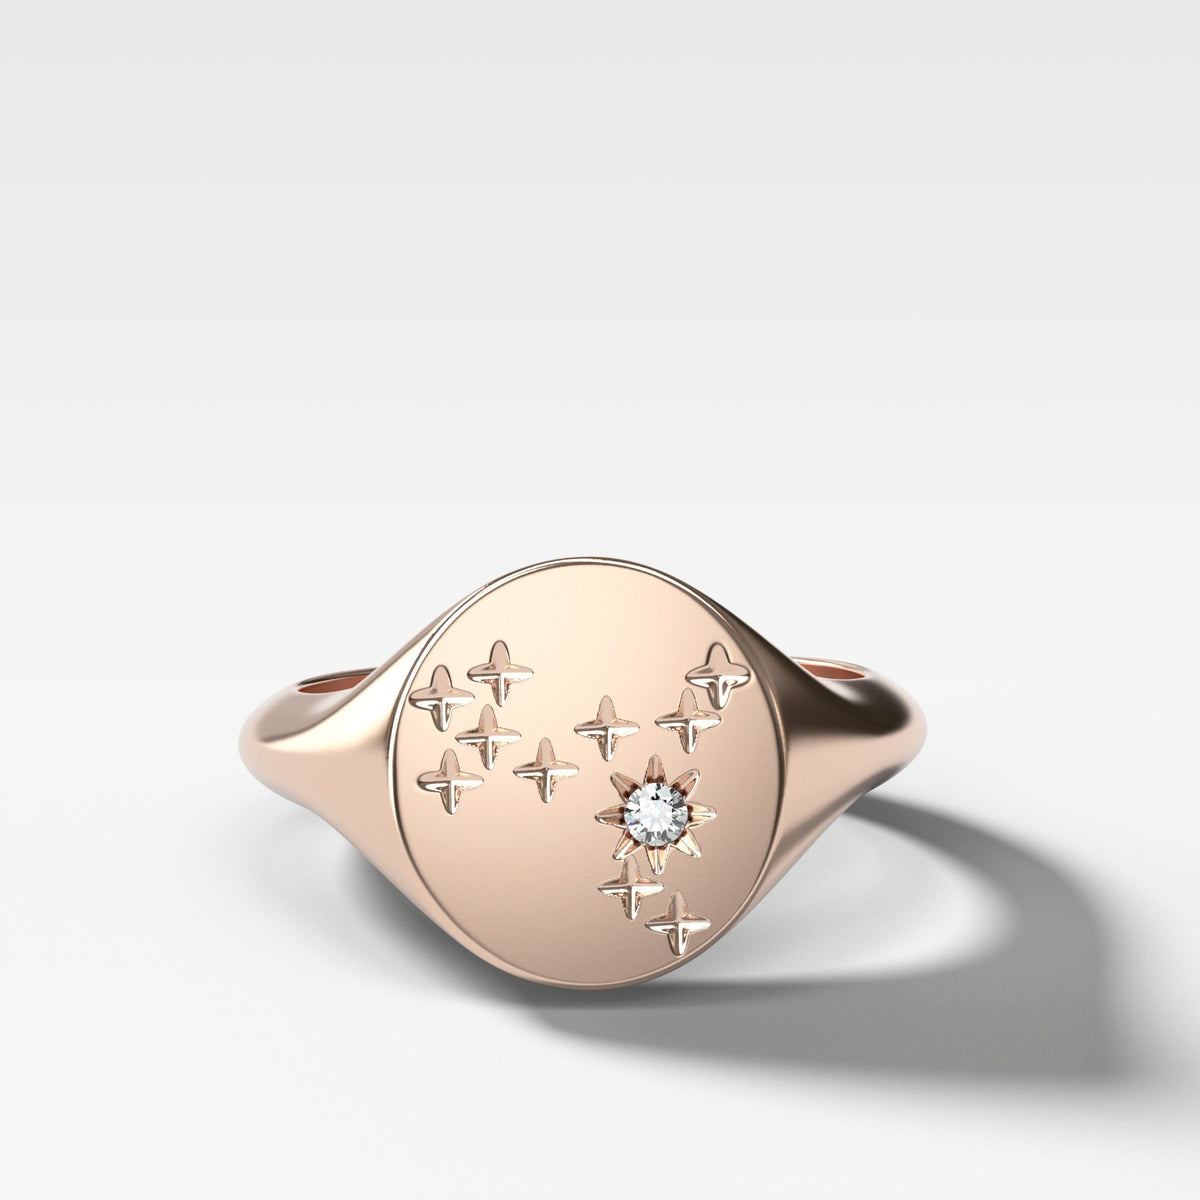 Starry Night Signet Ring by Good Stone in Rose GoldStarry Night Signet Ring by Good Stone in Rose Gold